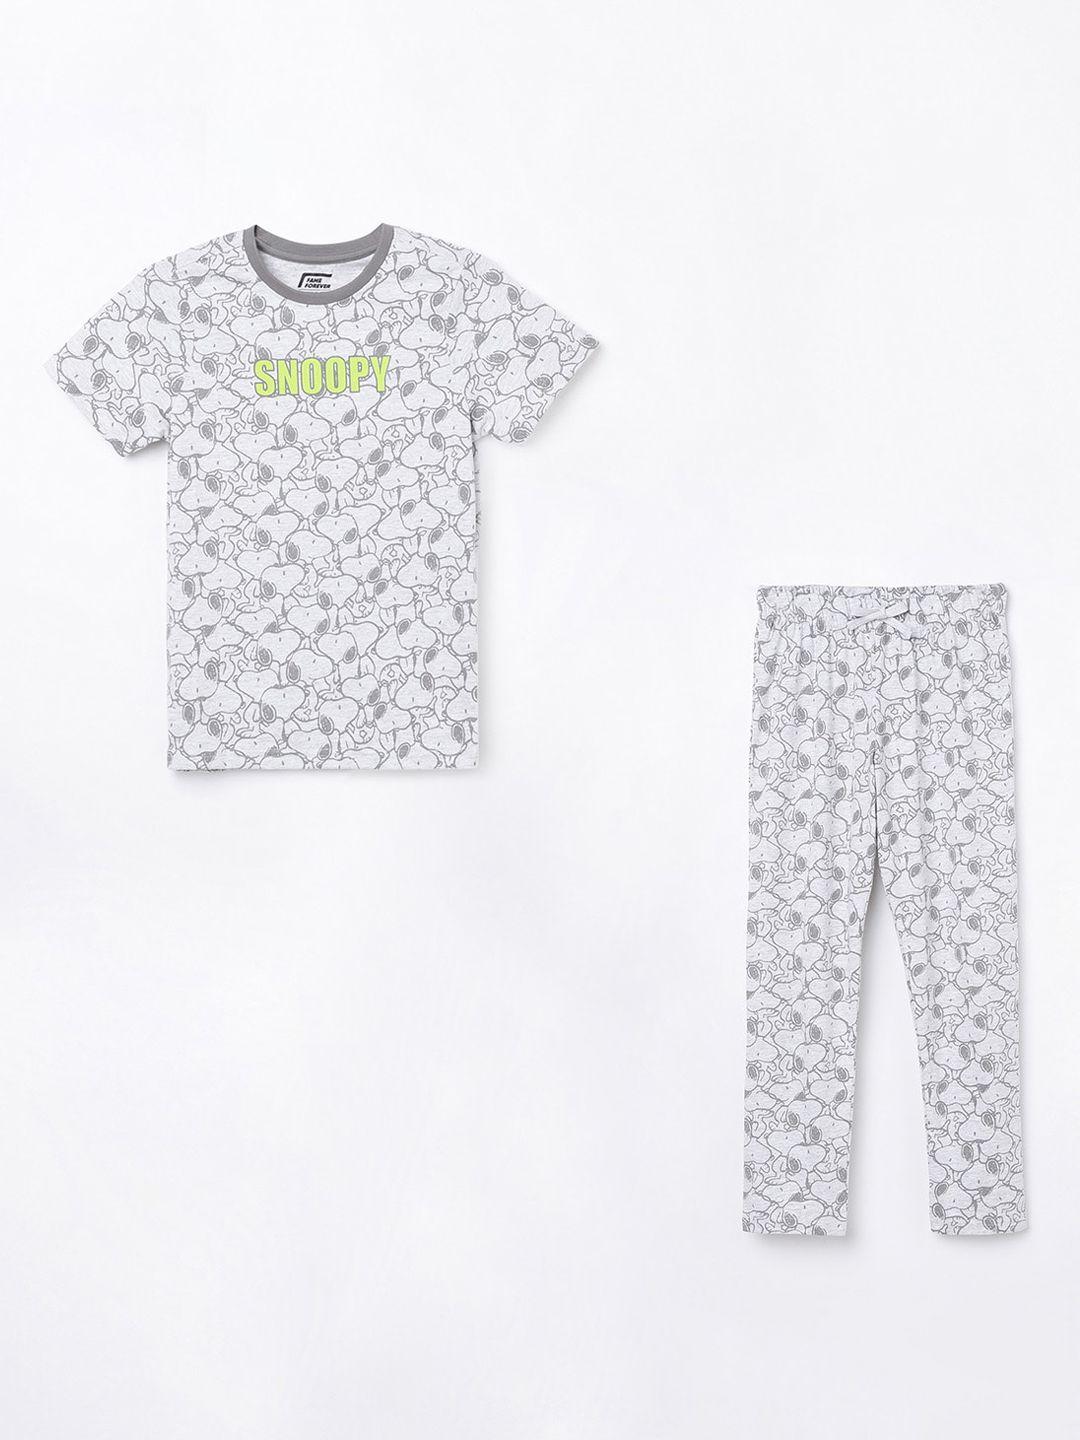 fame forever by lifestyle boys snoopy printed clothing set